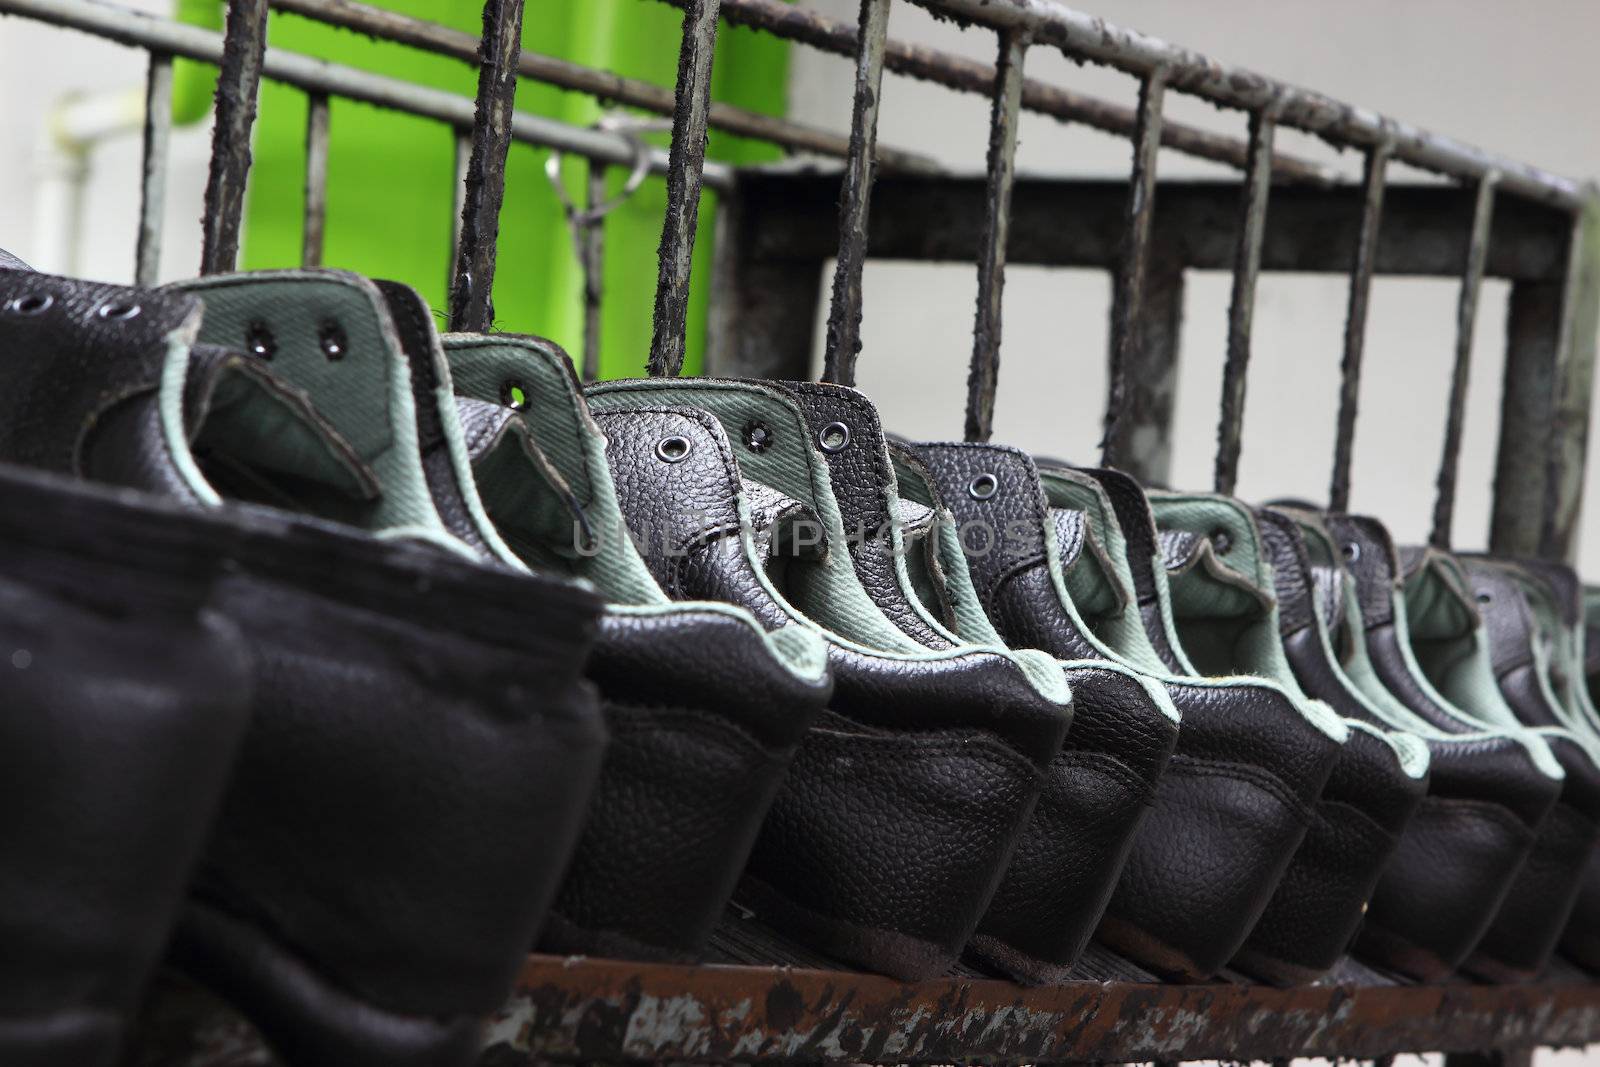 Factory of safety shoes by rufous